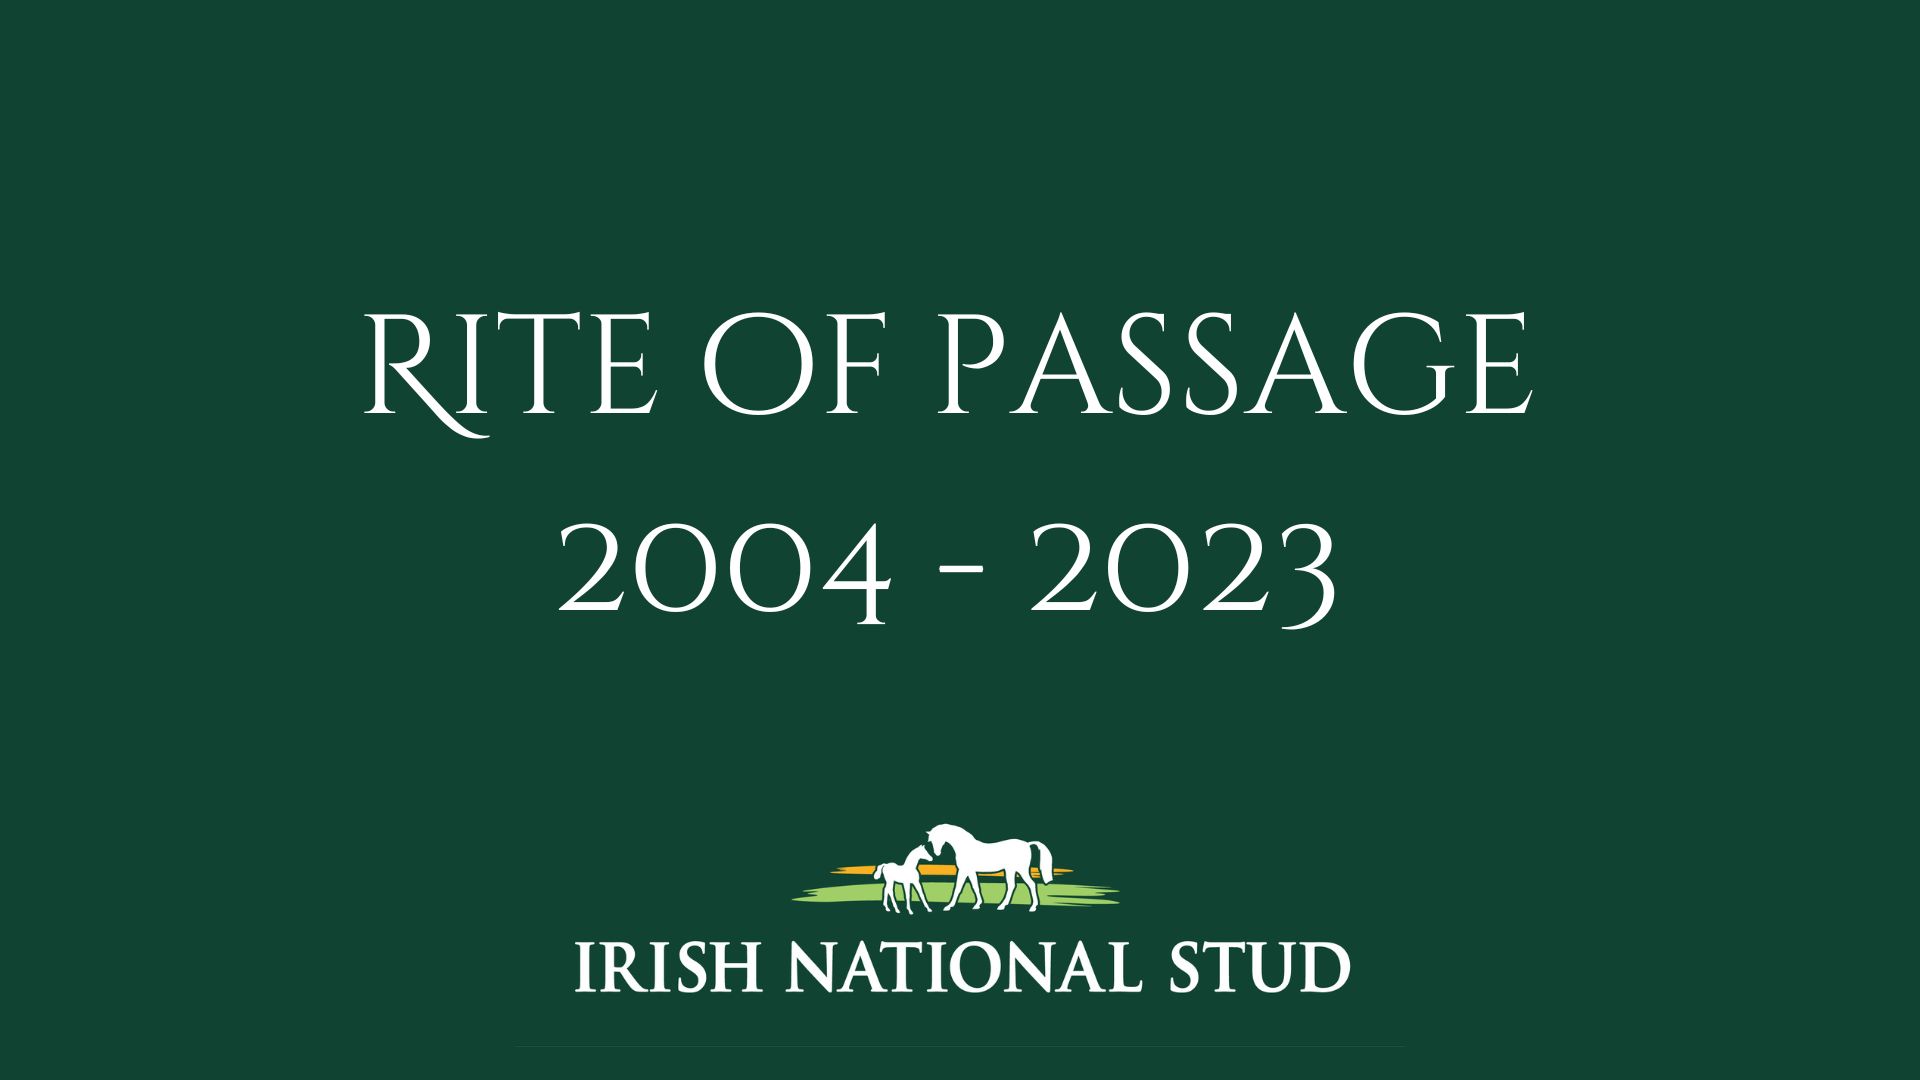 The Irish National Stud are deeply saddened to announce the passing of Rite of Passage.